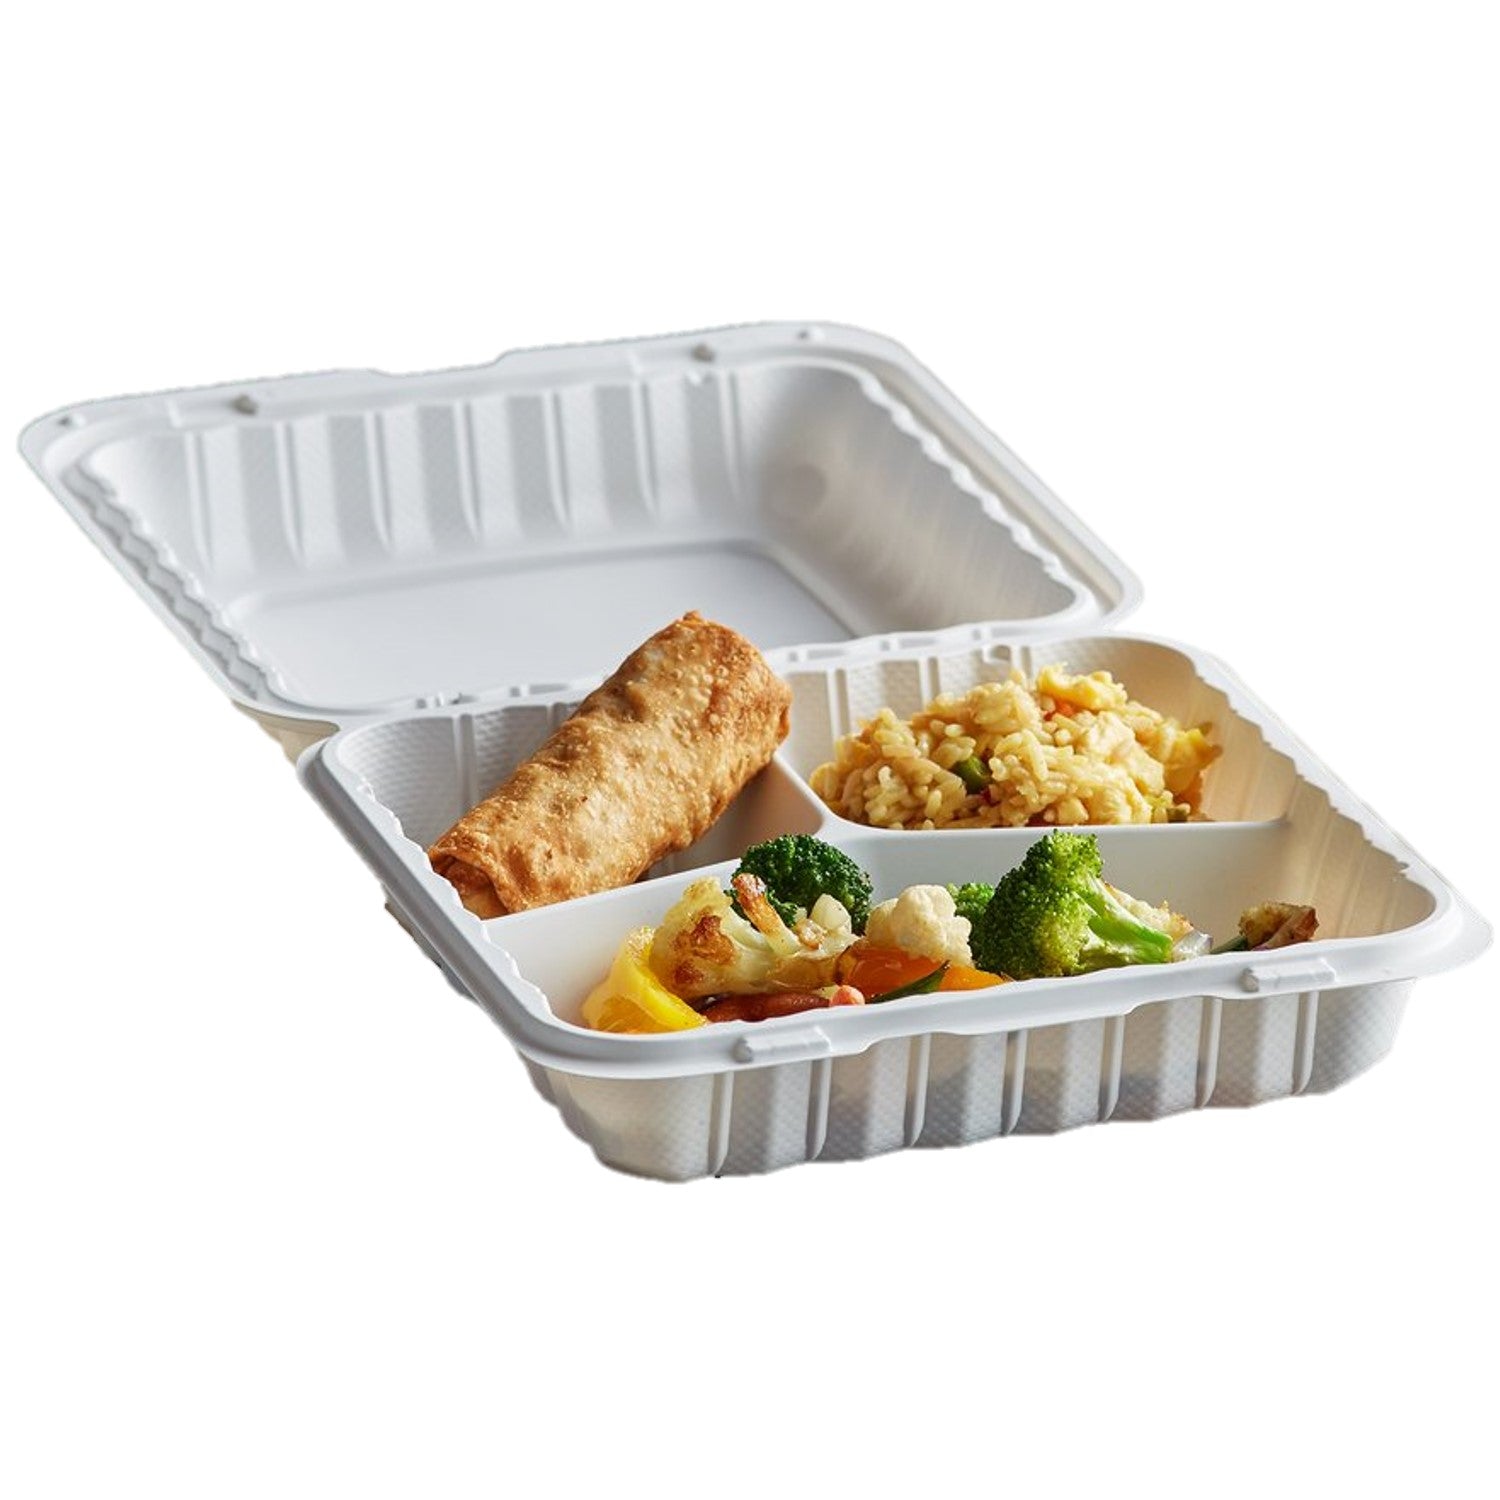 9X9 3-Compartment Clamshell To Go Containers [300pcs/ctn] Renewable &  Compostable Plant-Based